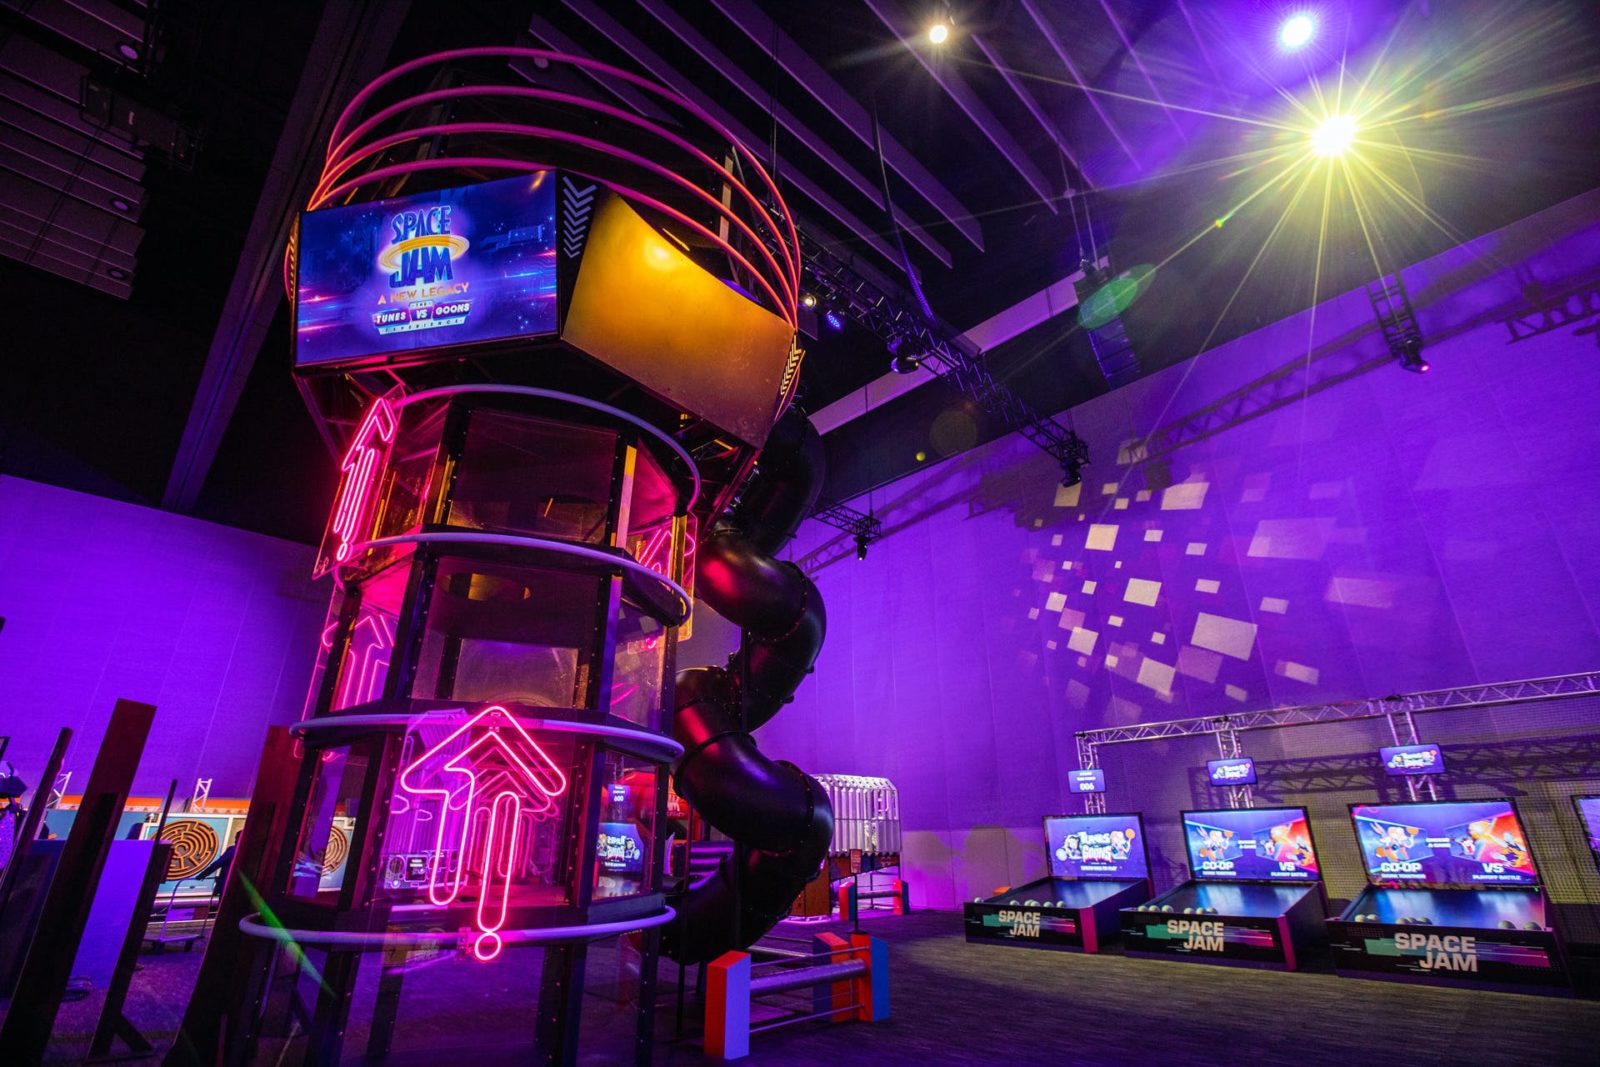 The Power-Up Tower at the Space Jam Experience at MCEC